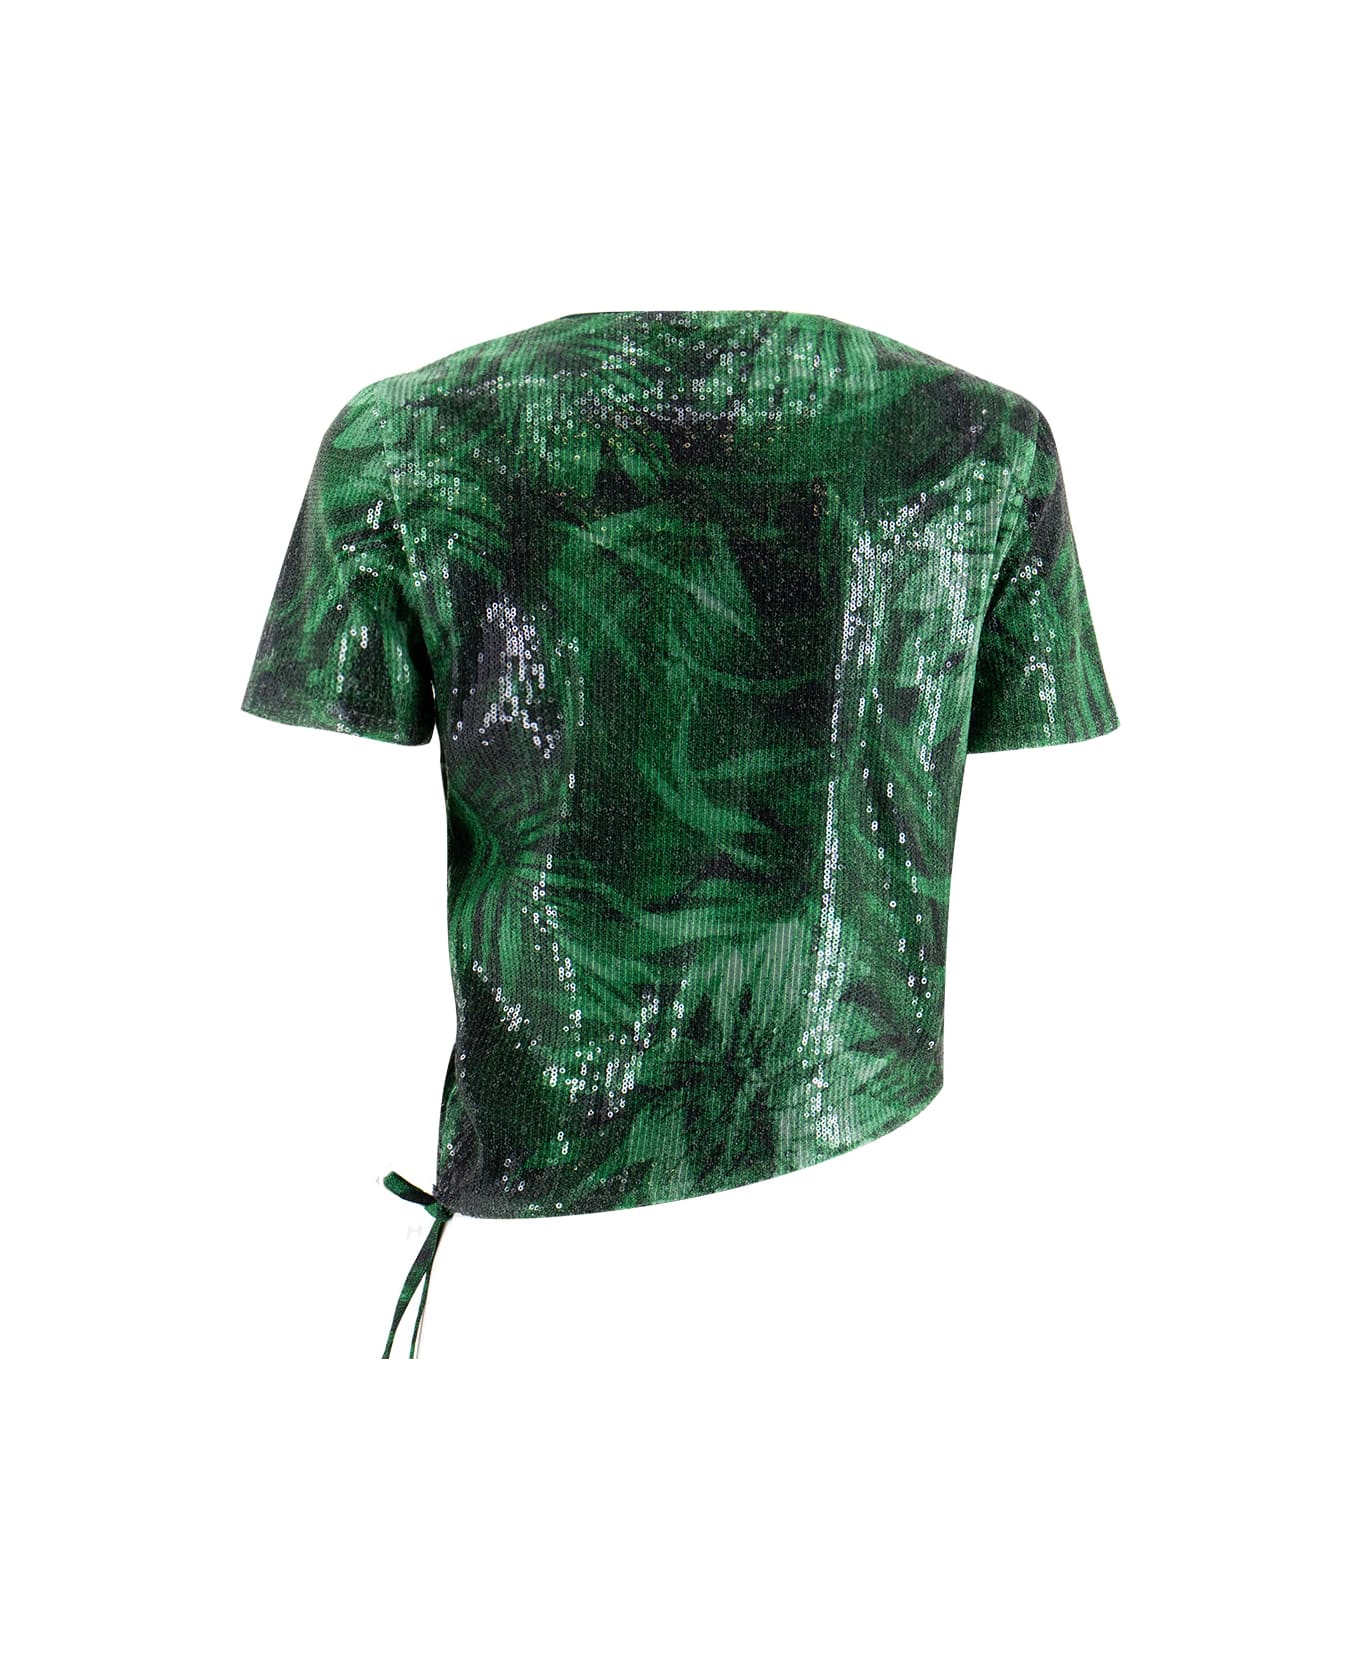 Ermanno Firenze T-shirt - GREEN/BLACK/OFF WH Tシャツ